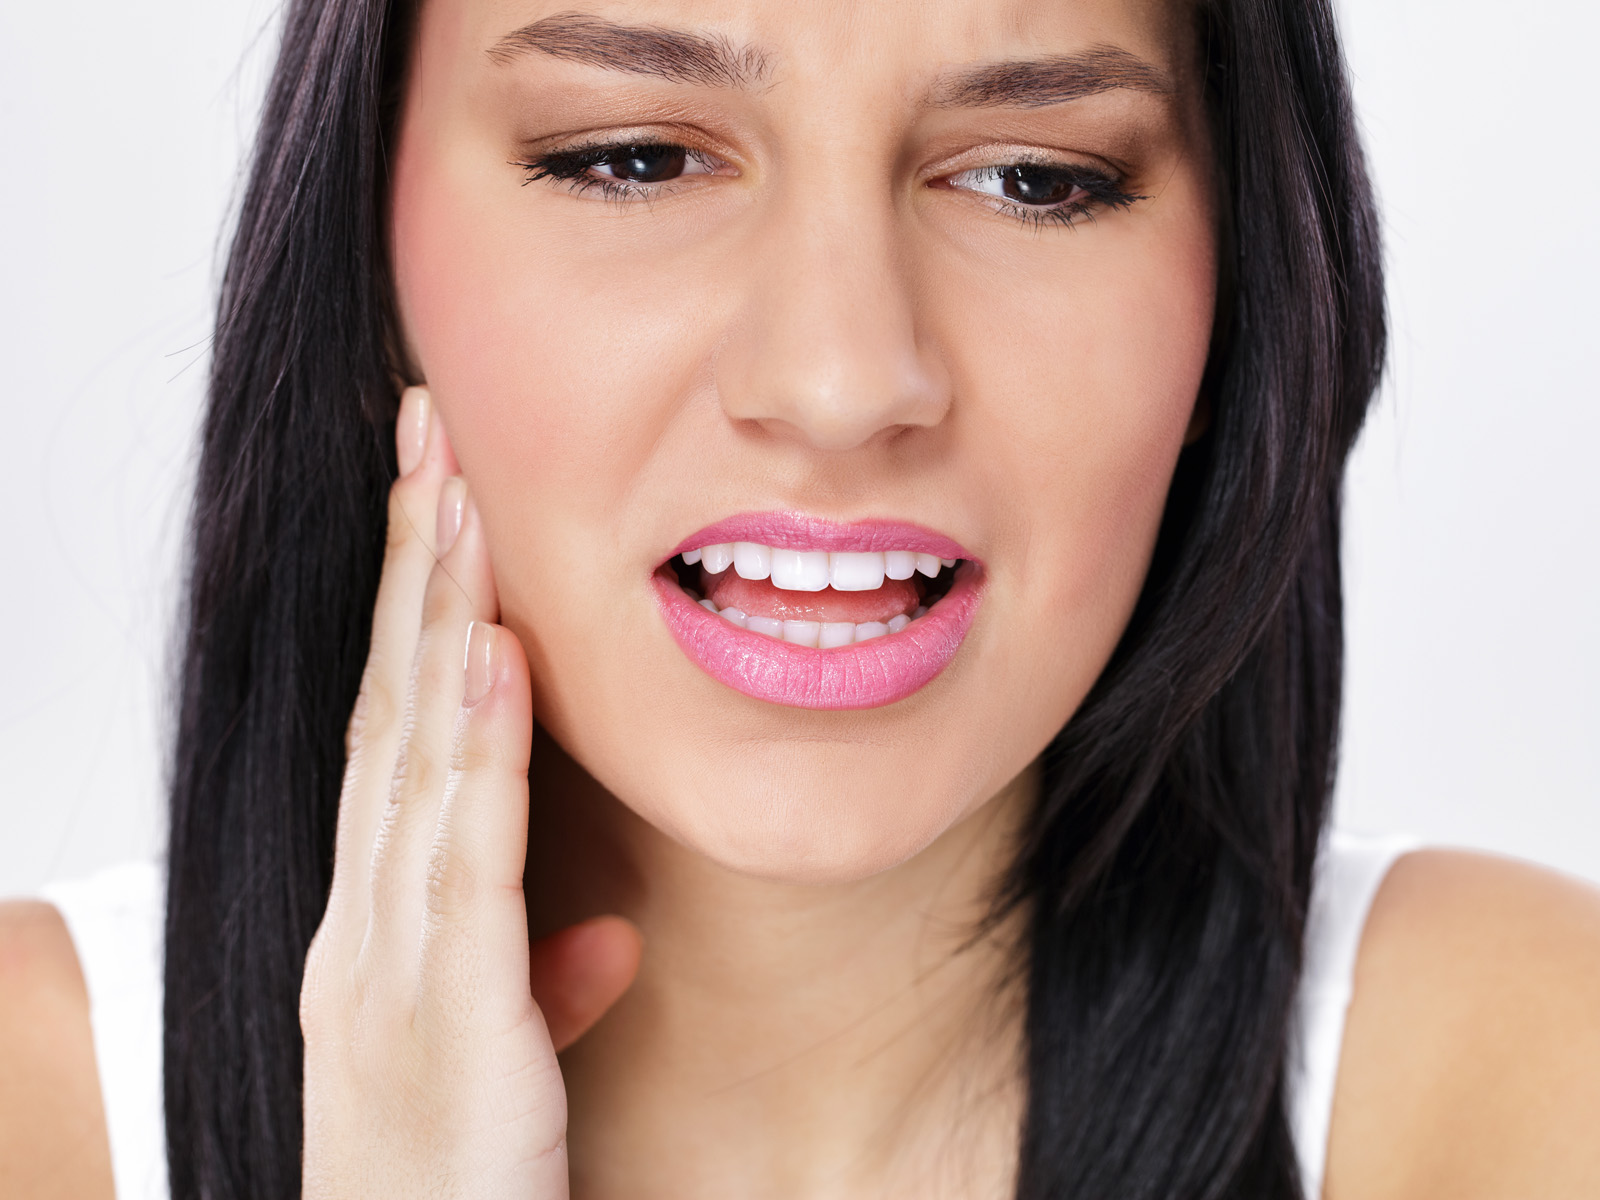 What You Can Do If You Have A Toothache?